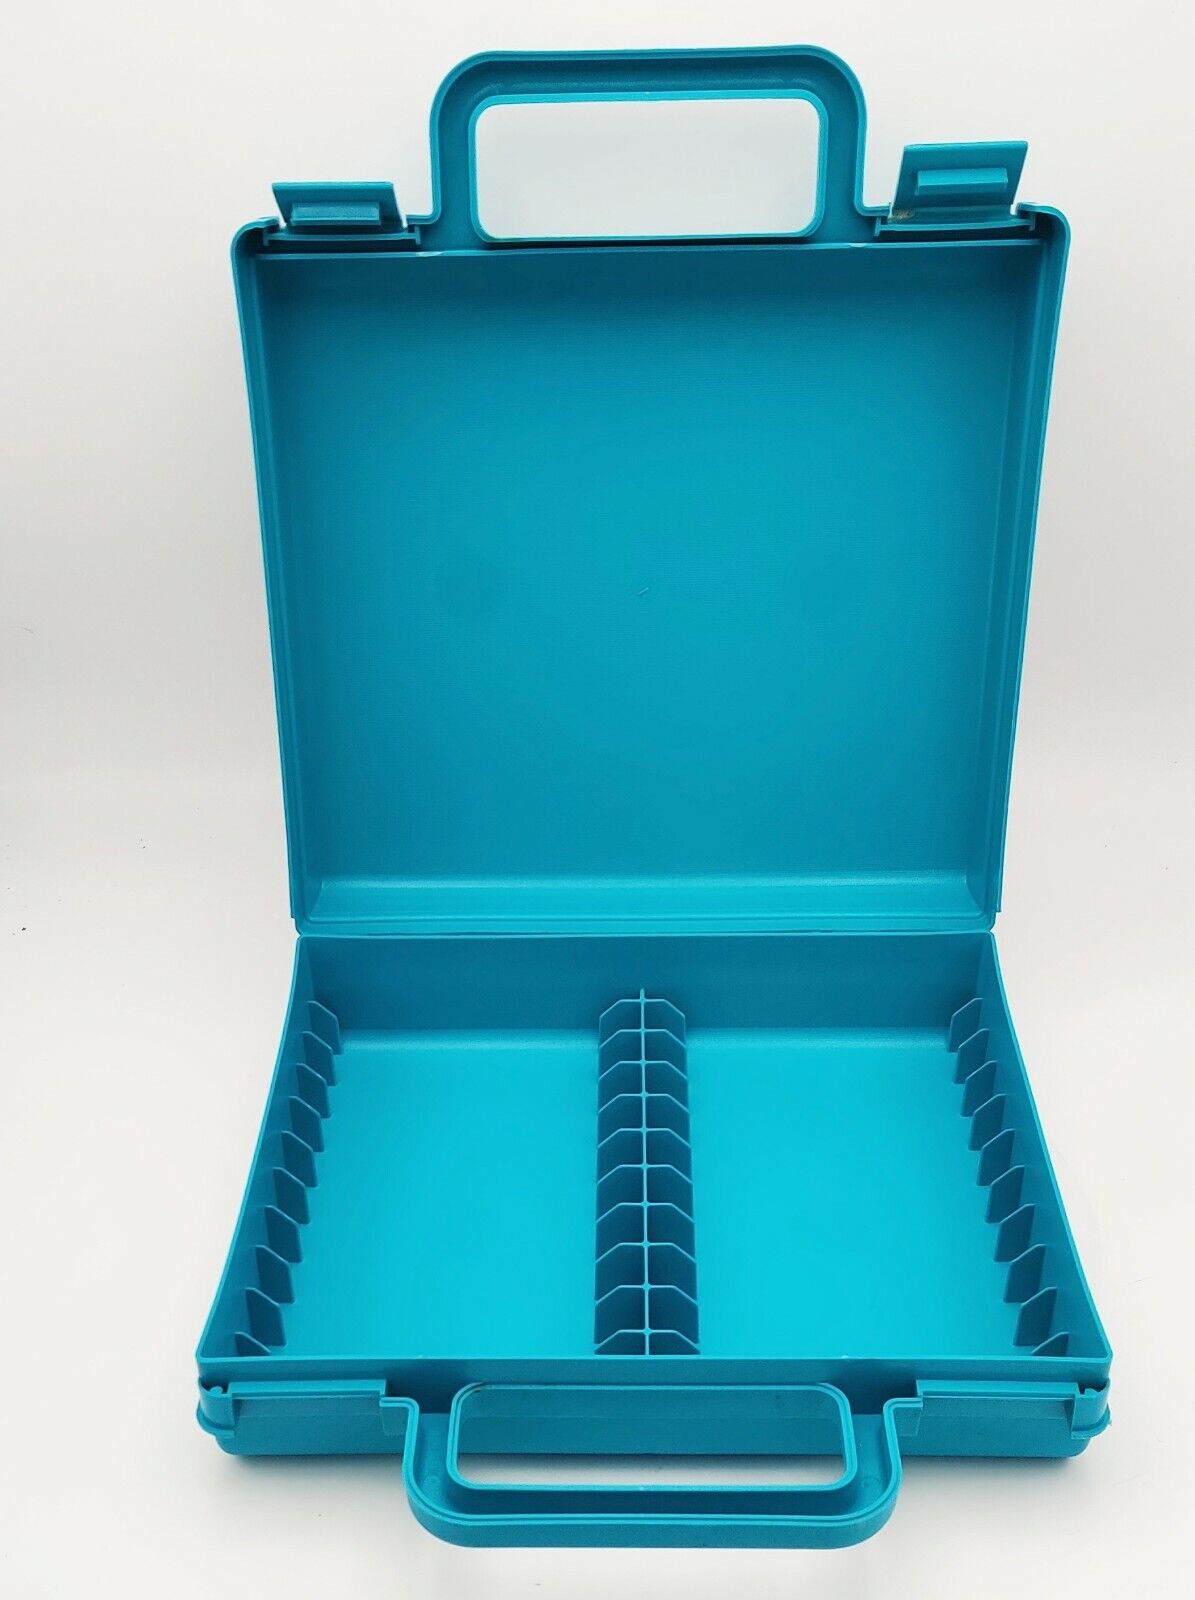 Vintage Turquoise Teal Blue Plastic Cassette Carrying Carry Case Holds 20 Tapes